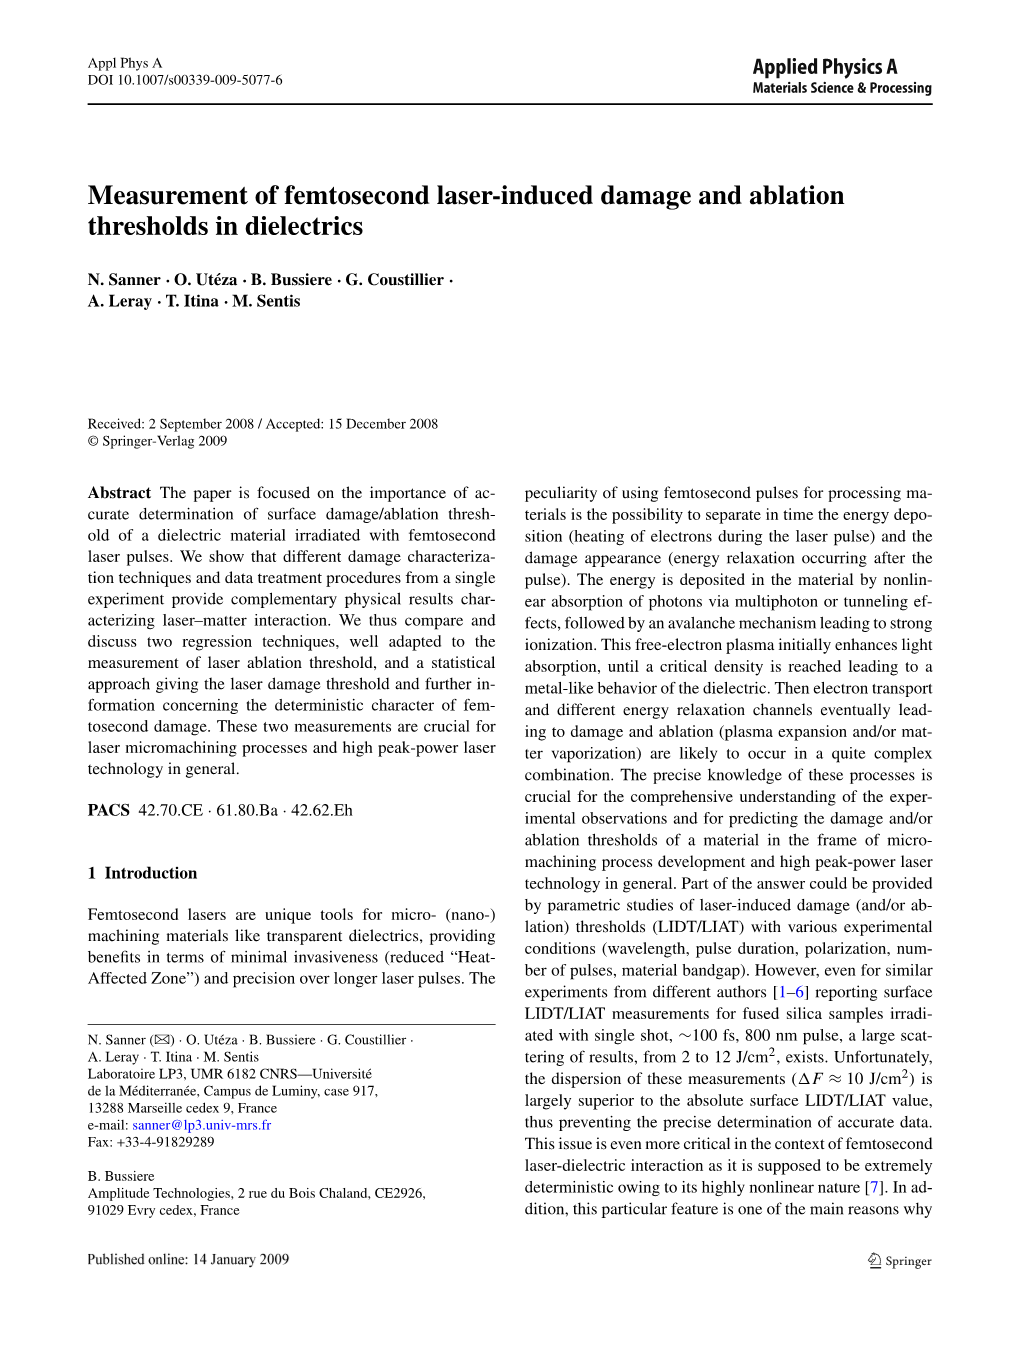 Measurement of Femtosecond Laser-Induced Damage and Ablation Thresholds in Dielectrics